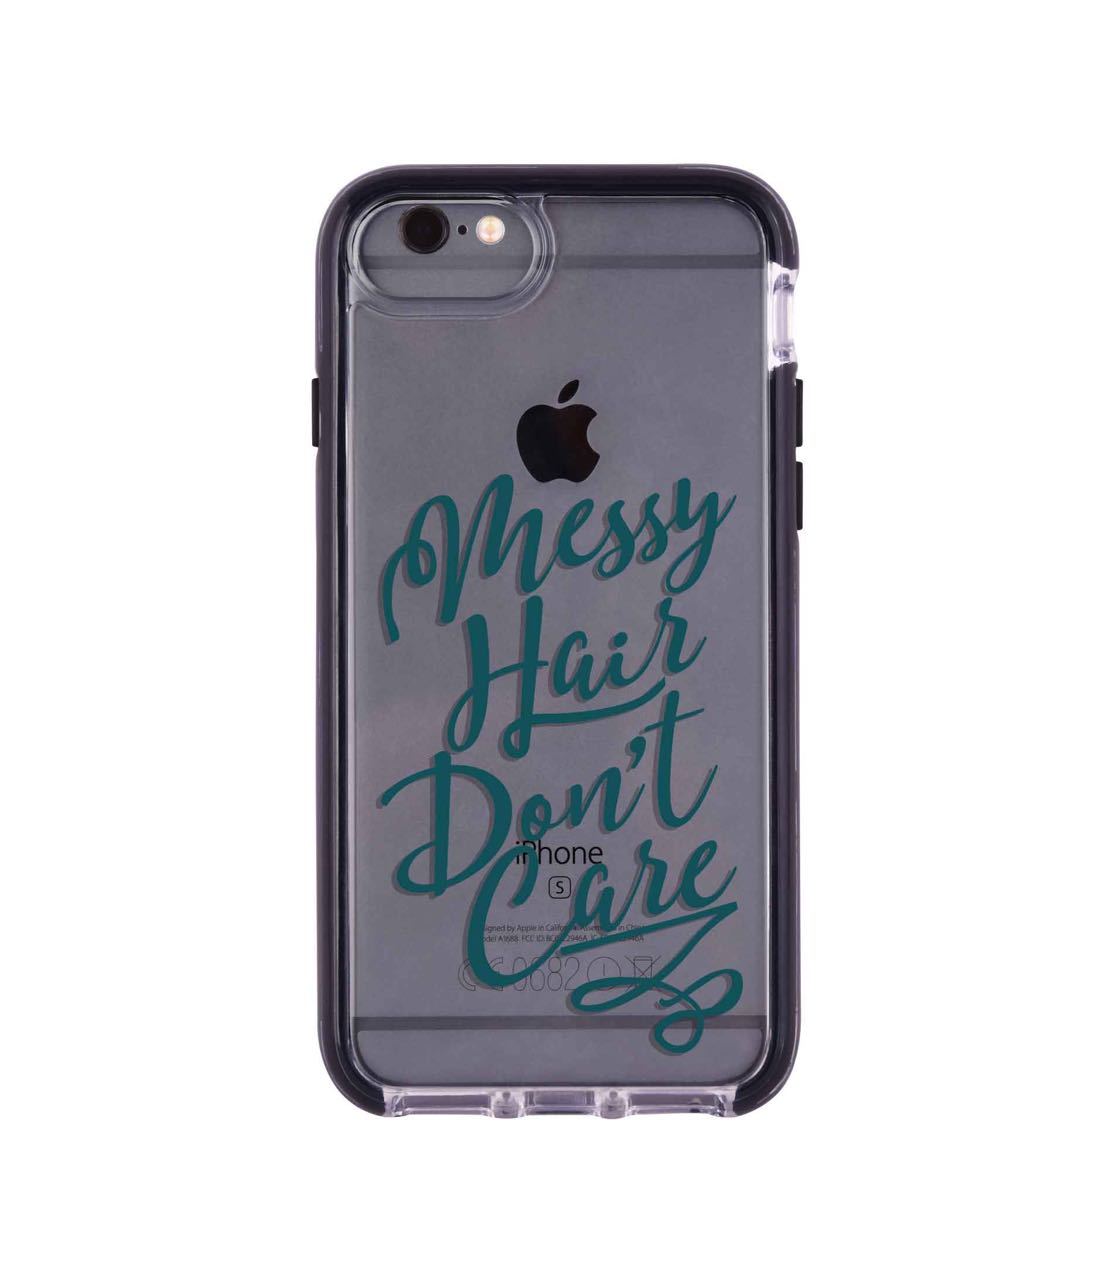 Messy Hair Dont Care - Extreme Phone Case for iPhone 6S